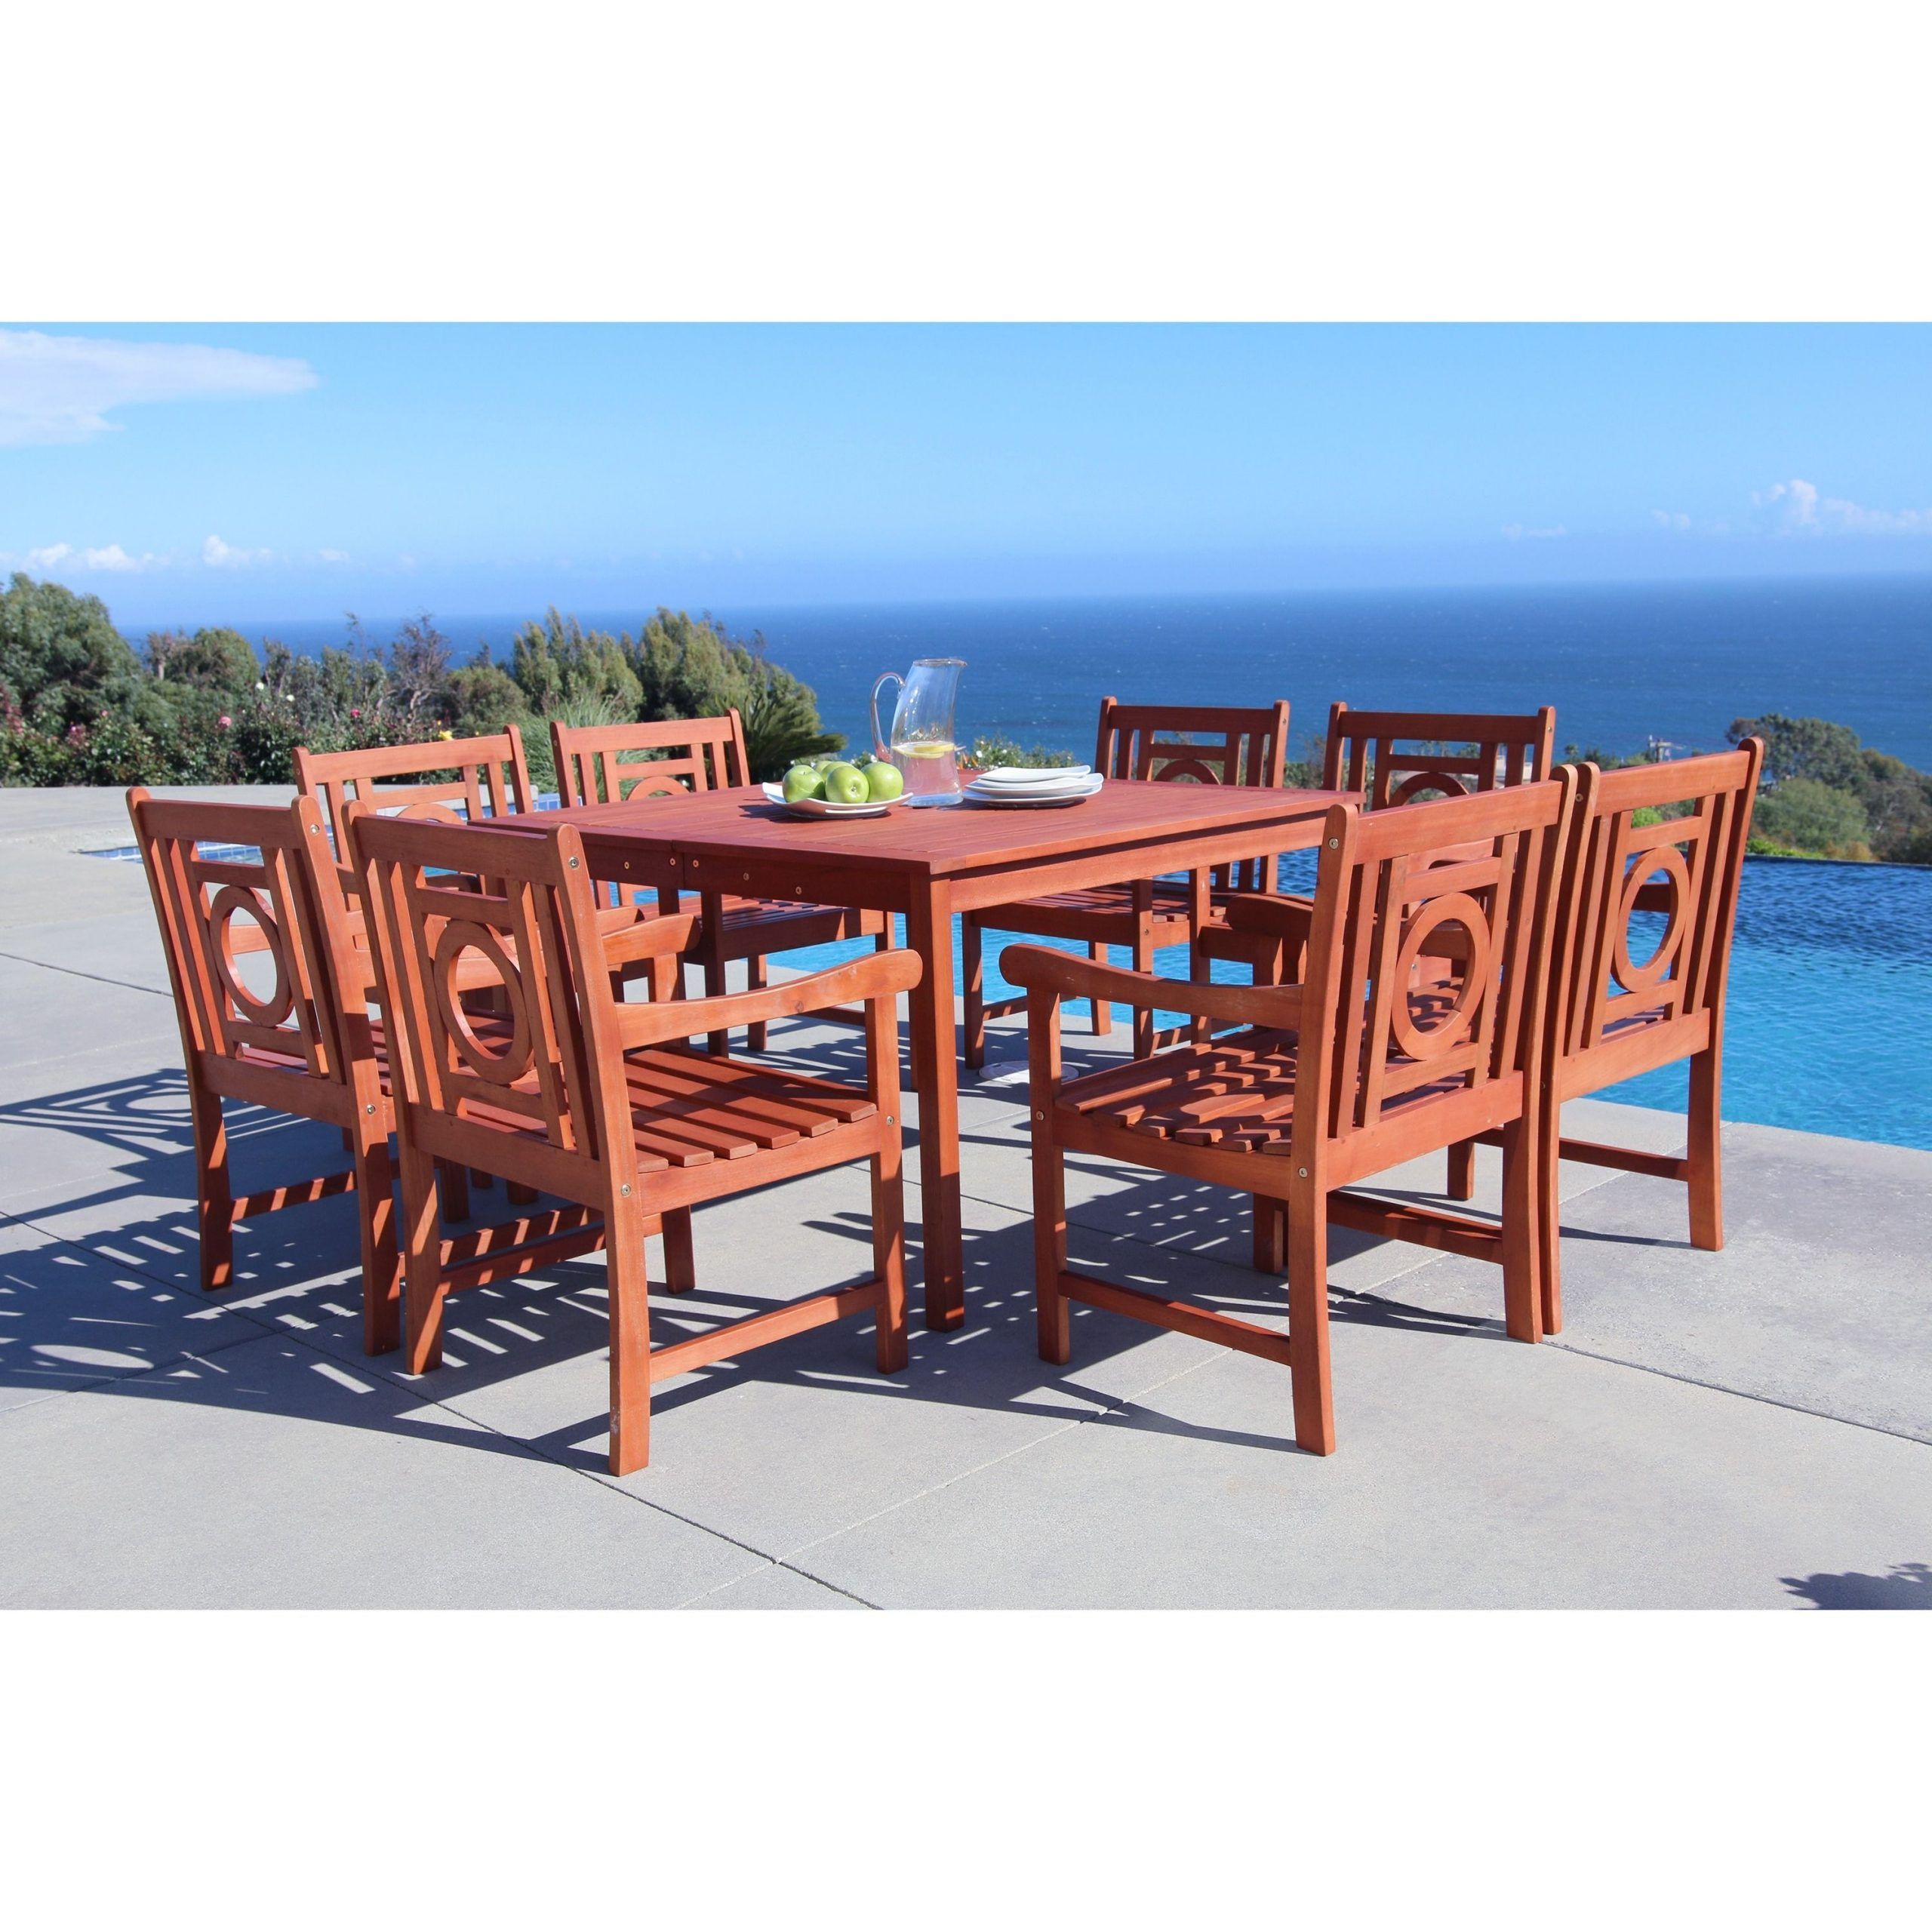 Malibu Eco Friendly 9 Piece Outdoor Hardwood Dining Set With Square With Regard To 9 Piece Square Dining Sets (View 4 of 15)